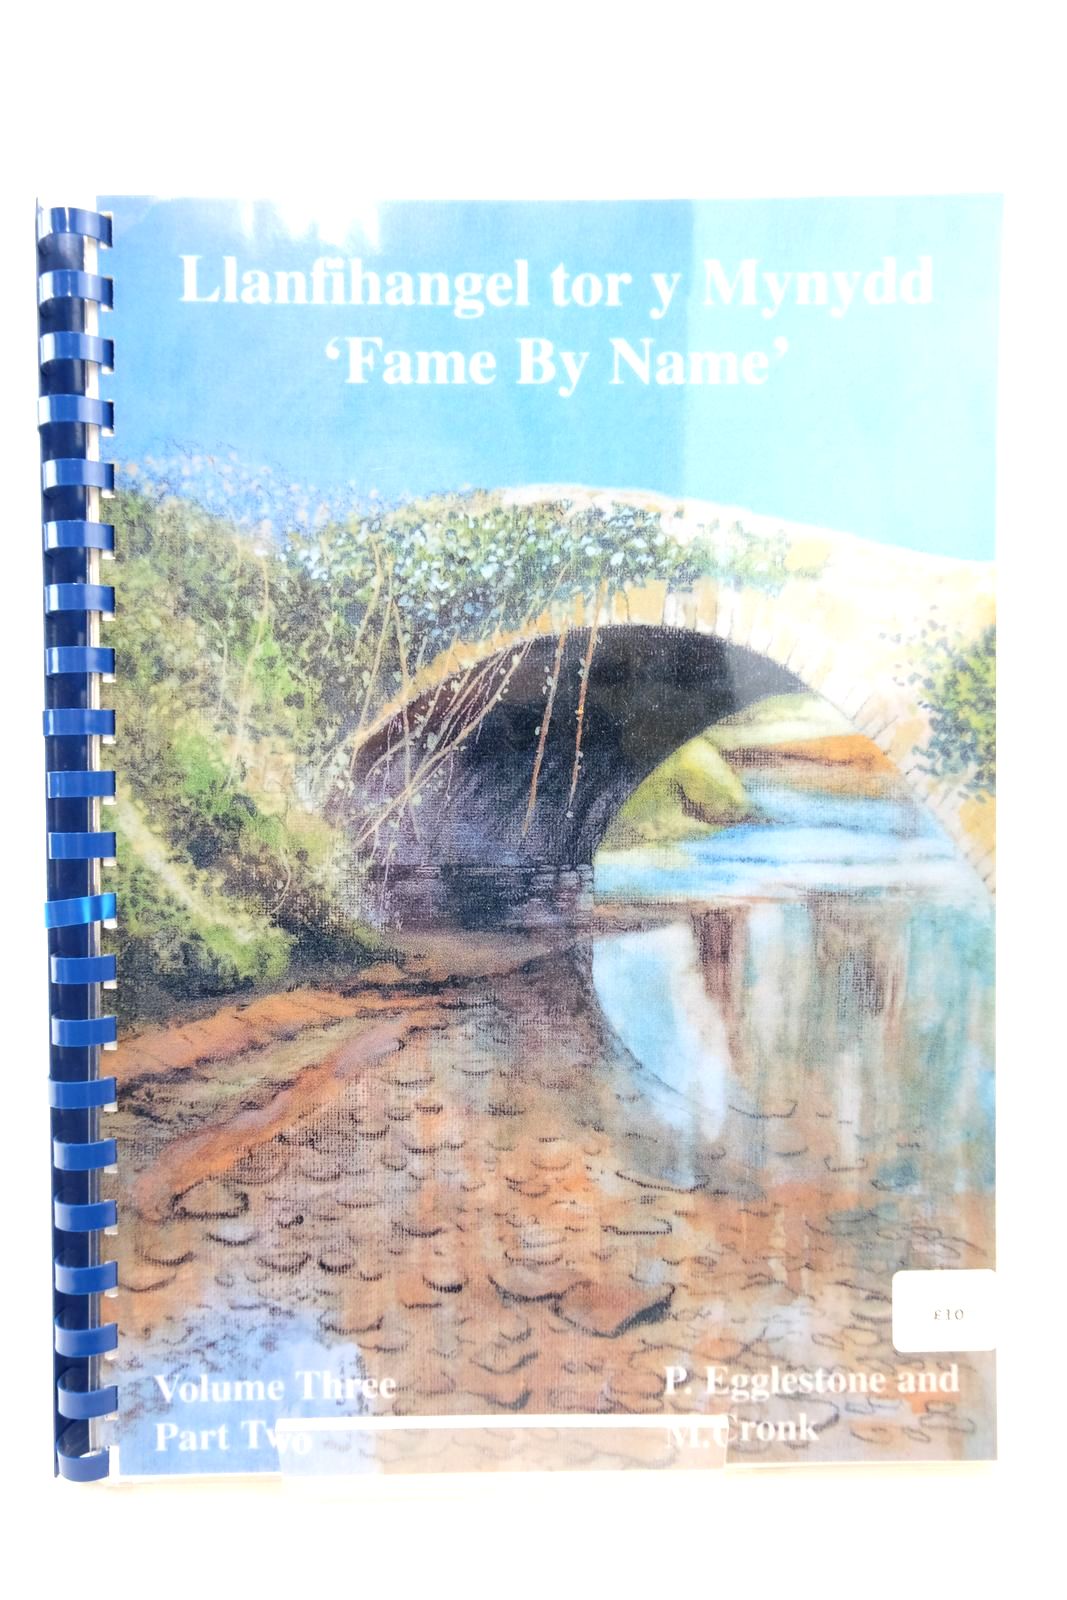 Photo of LLANFIHANGEL TOR Y MYNYDD - VOLUME THREE PART TWO  - FAME BY NAME- Stock Number: 2140828